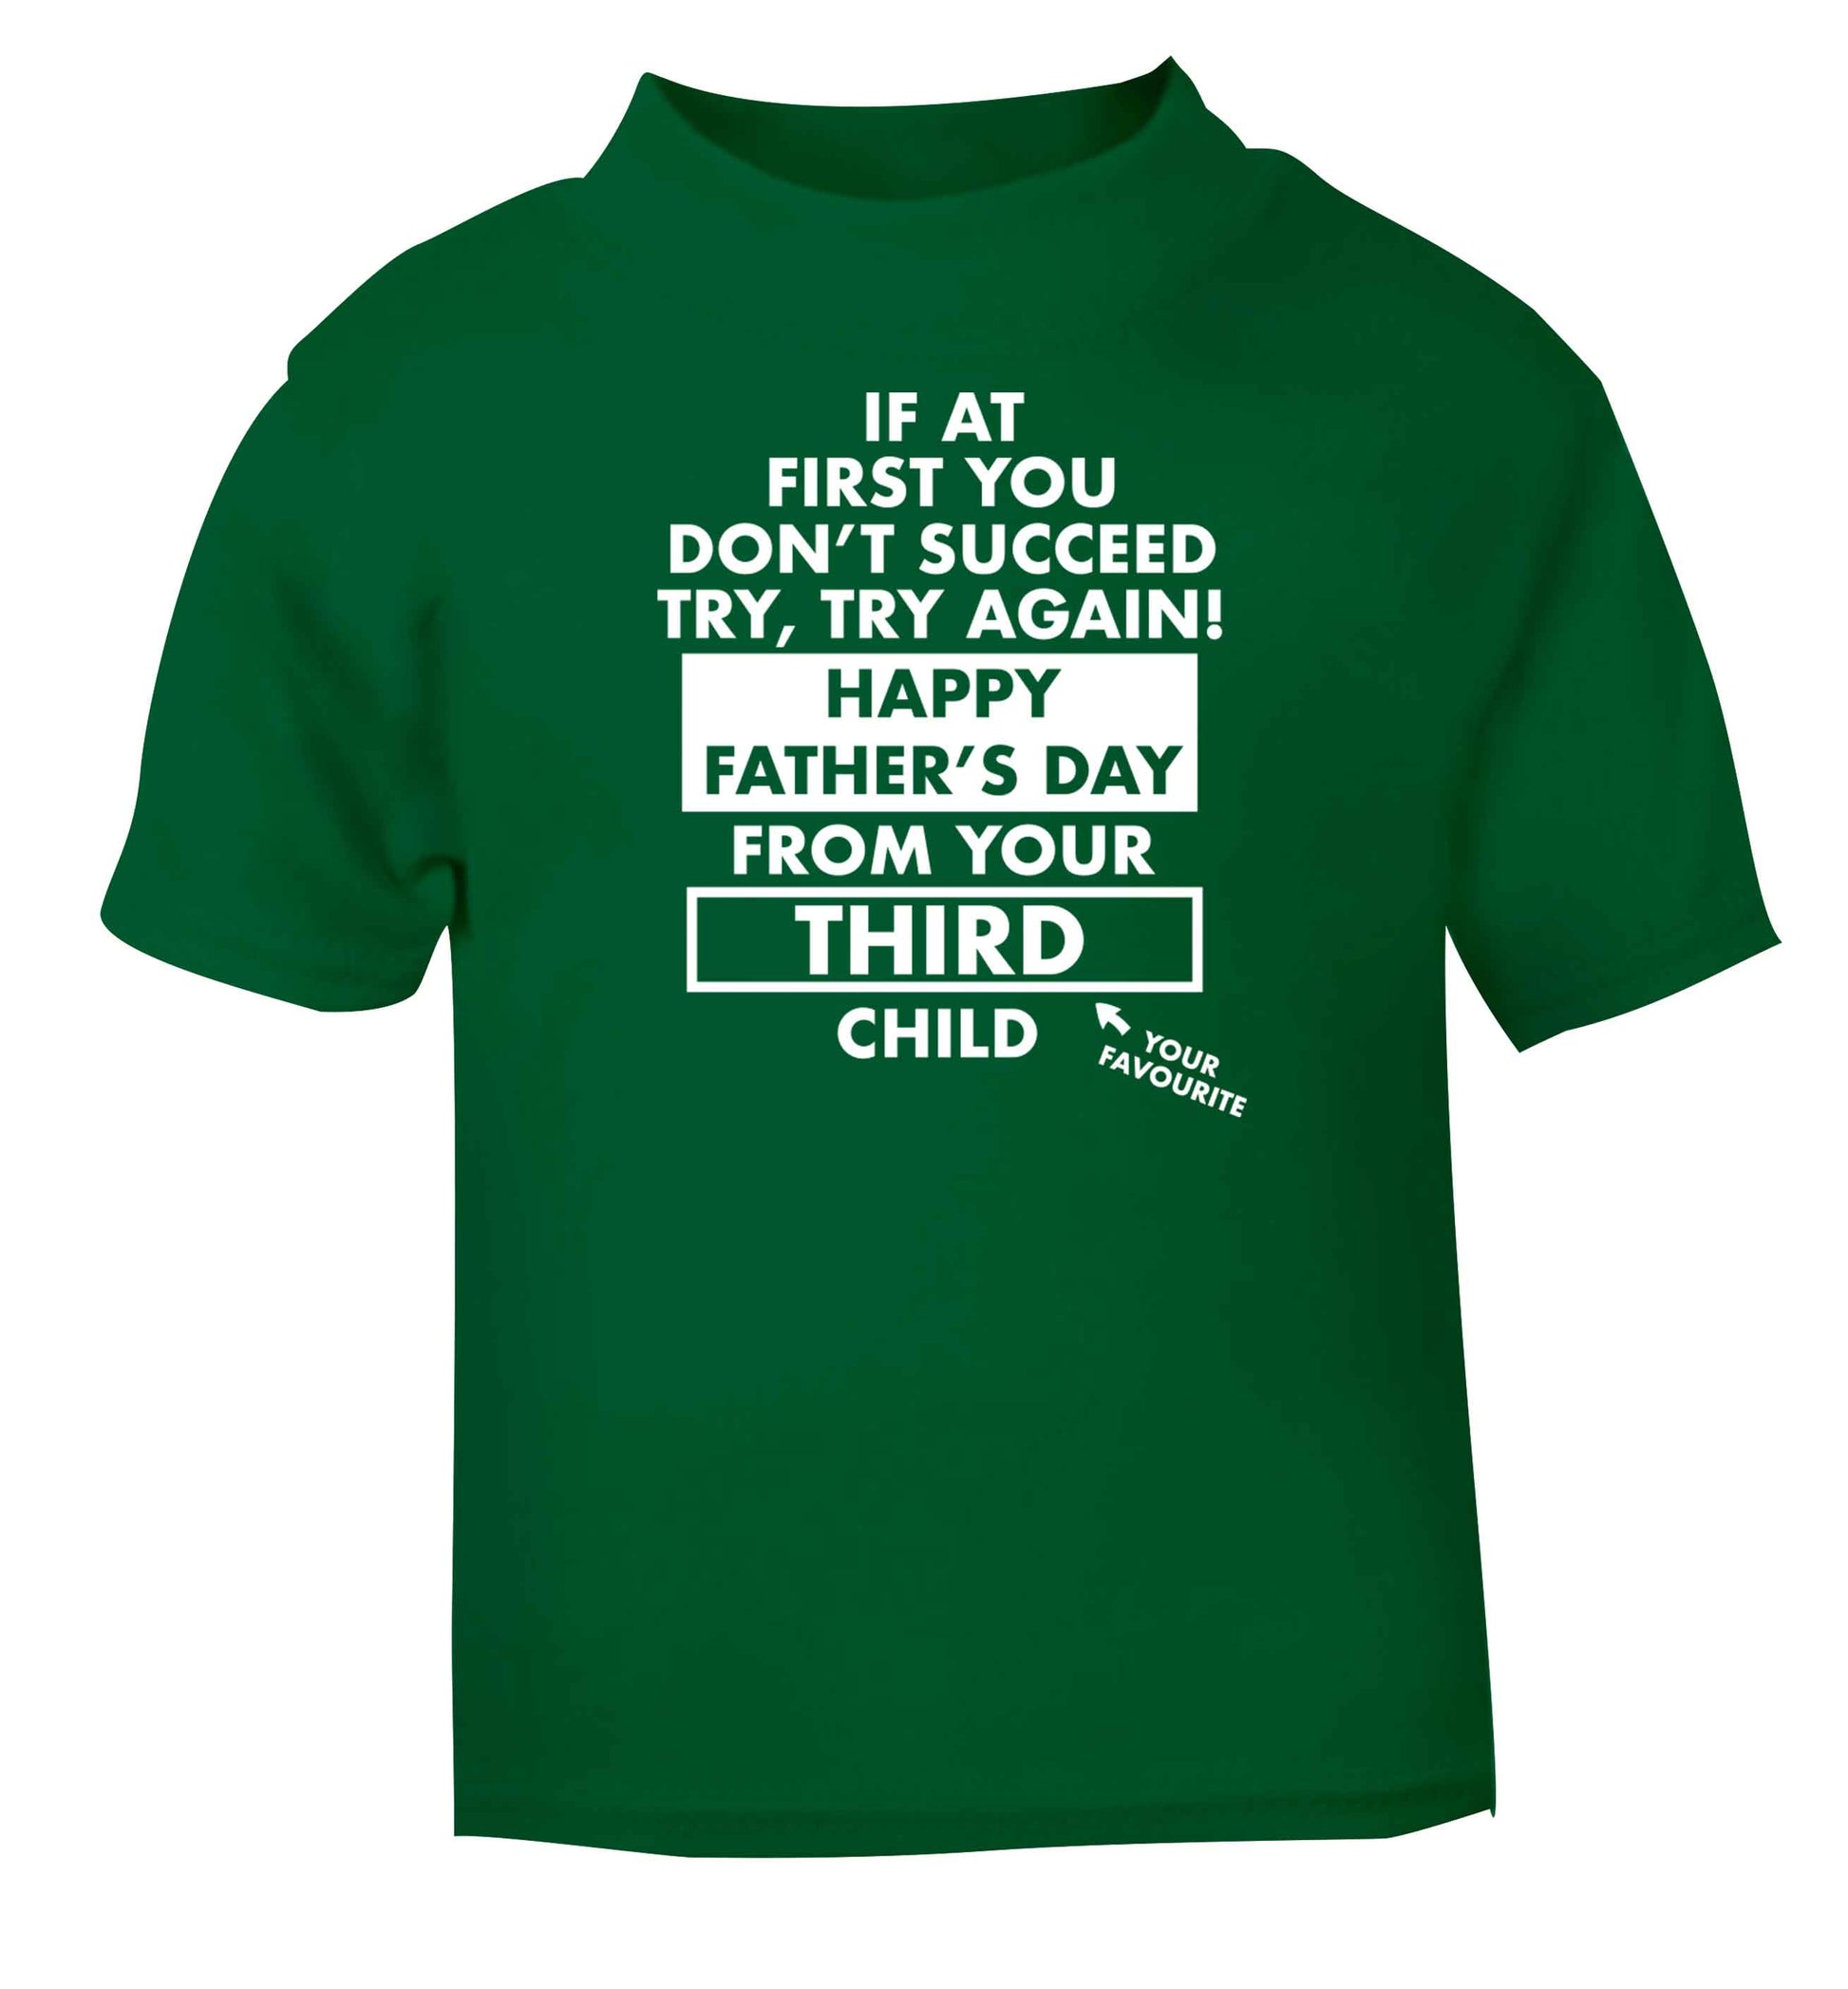 If at first you don't succeed try, try again Happy Father's day from your third child! green baby toddler Tshirt 2 Years